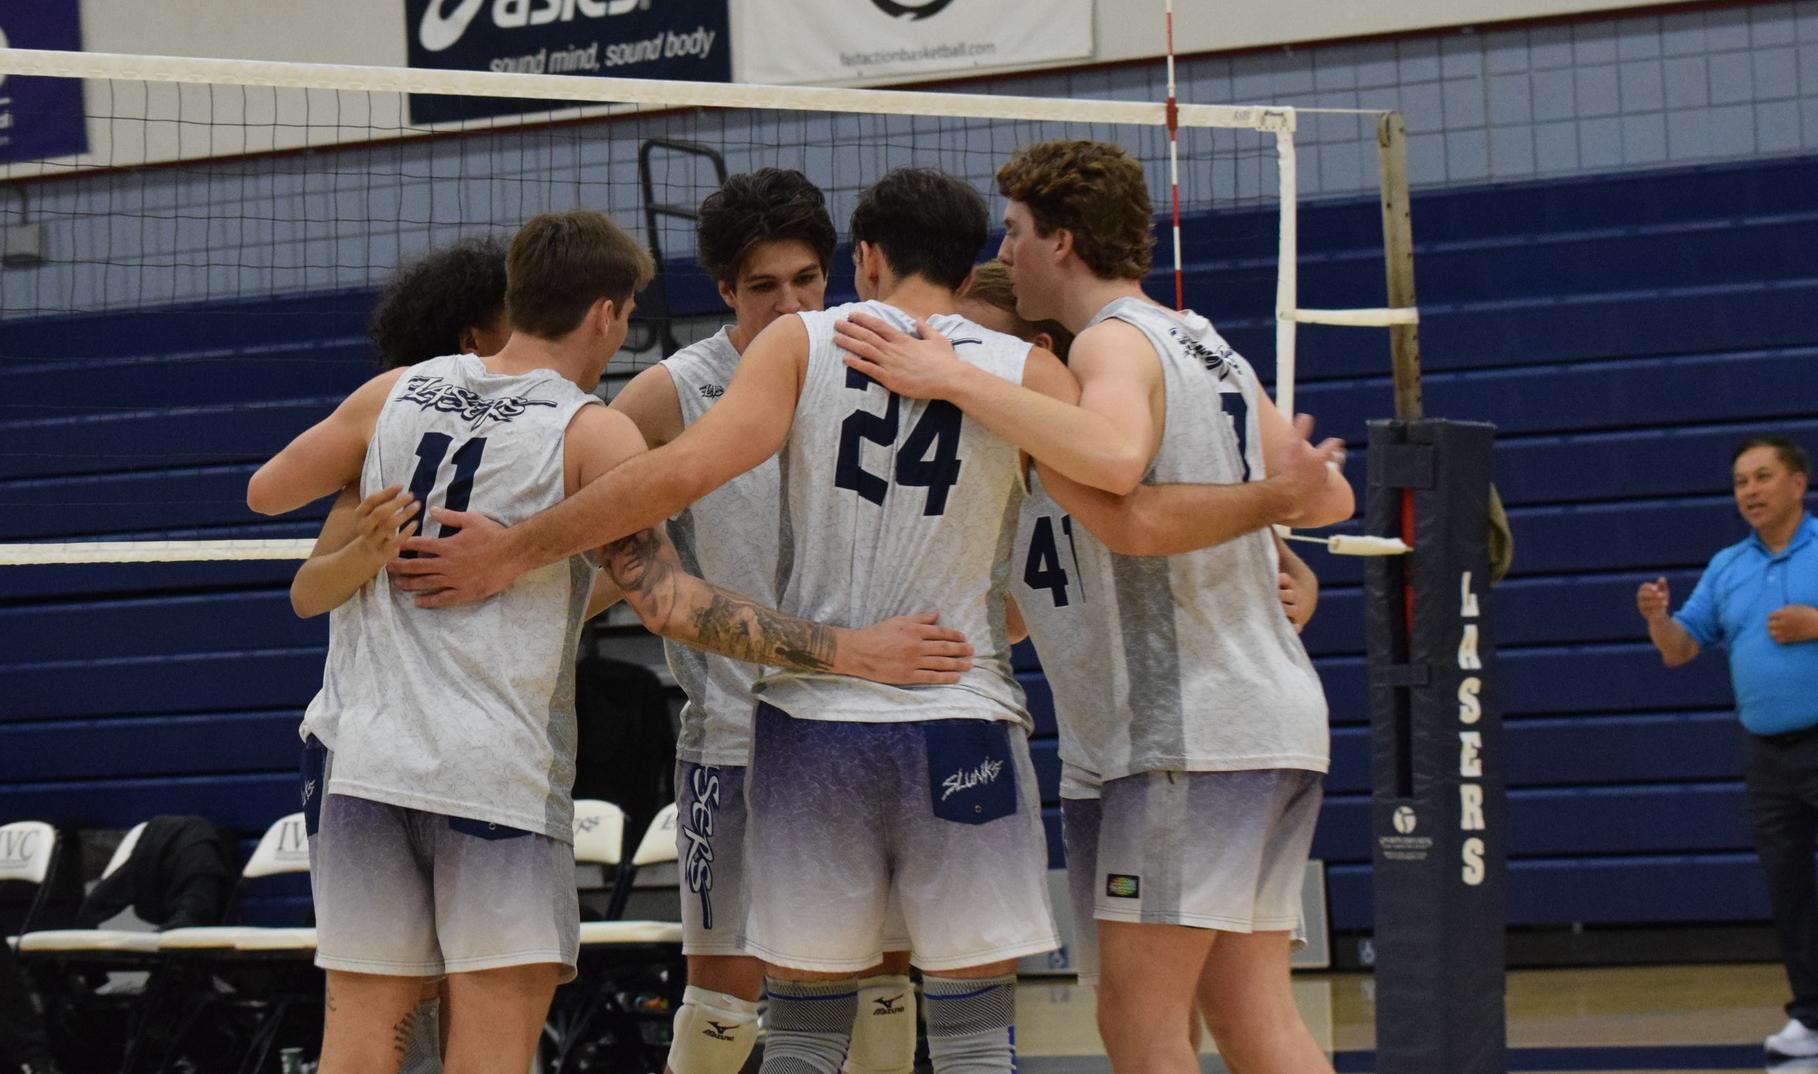 Men's volleyball loses in the first round of the playoffs